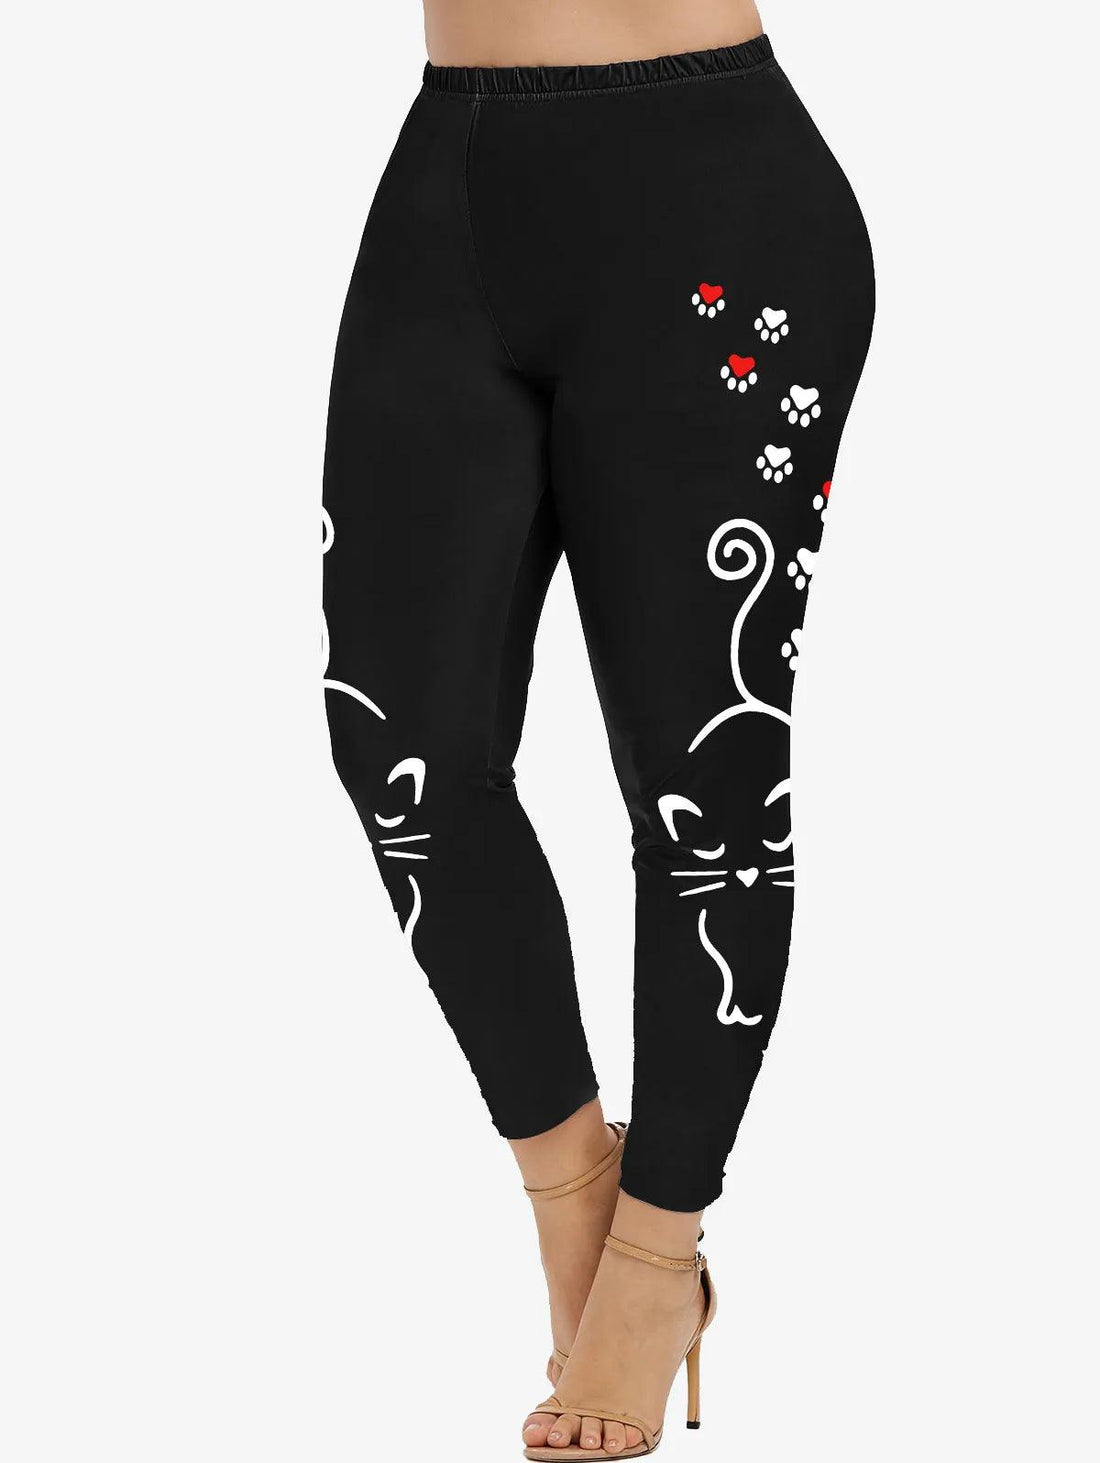 Cat Printted Leggins, Black, 3 Desings, S-5XL - Just Cats - Gifts for Cat Lovers